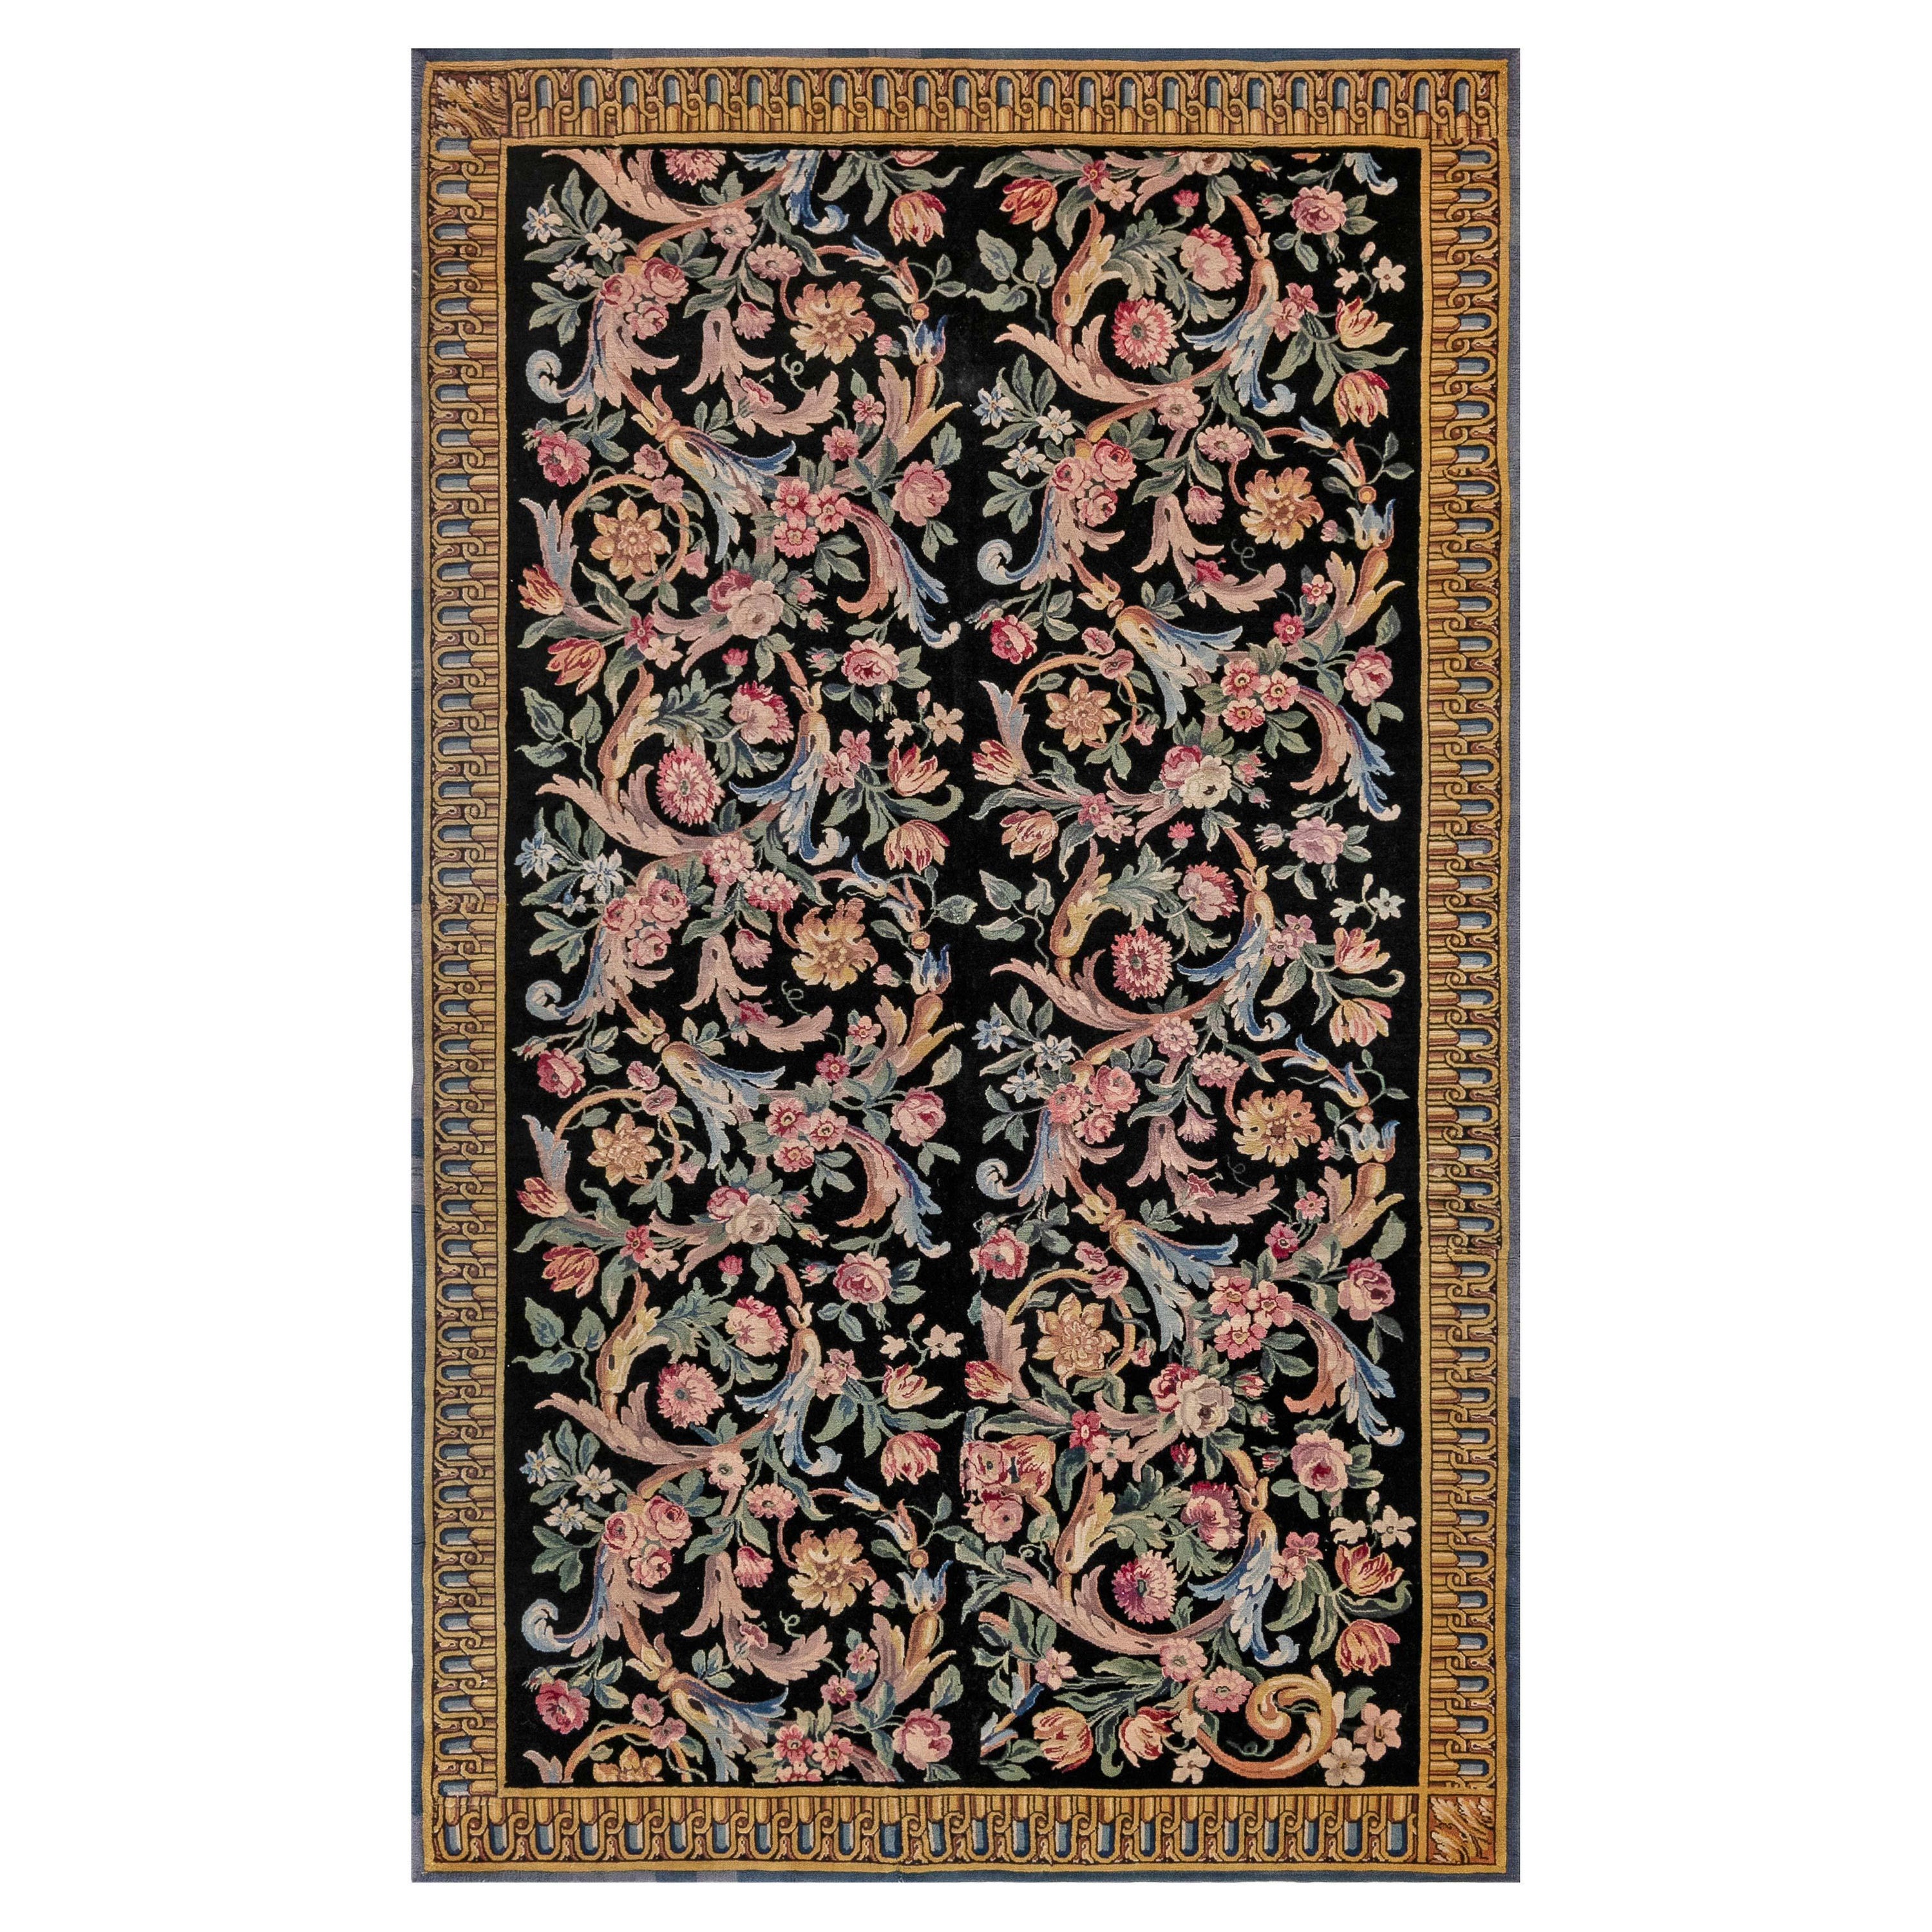 Early 20th Century Savonnerie Floral Rug 'Size Adjusted'